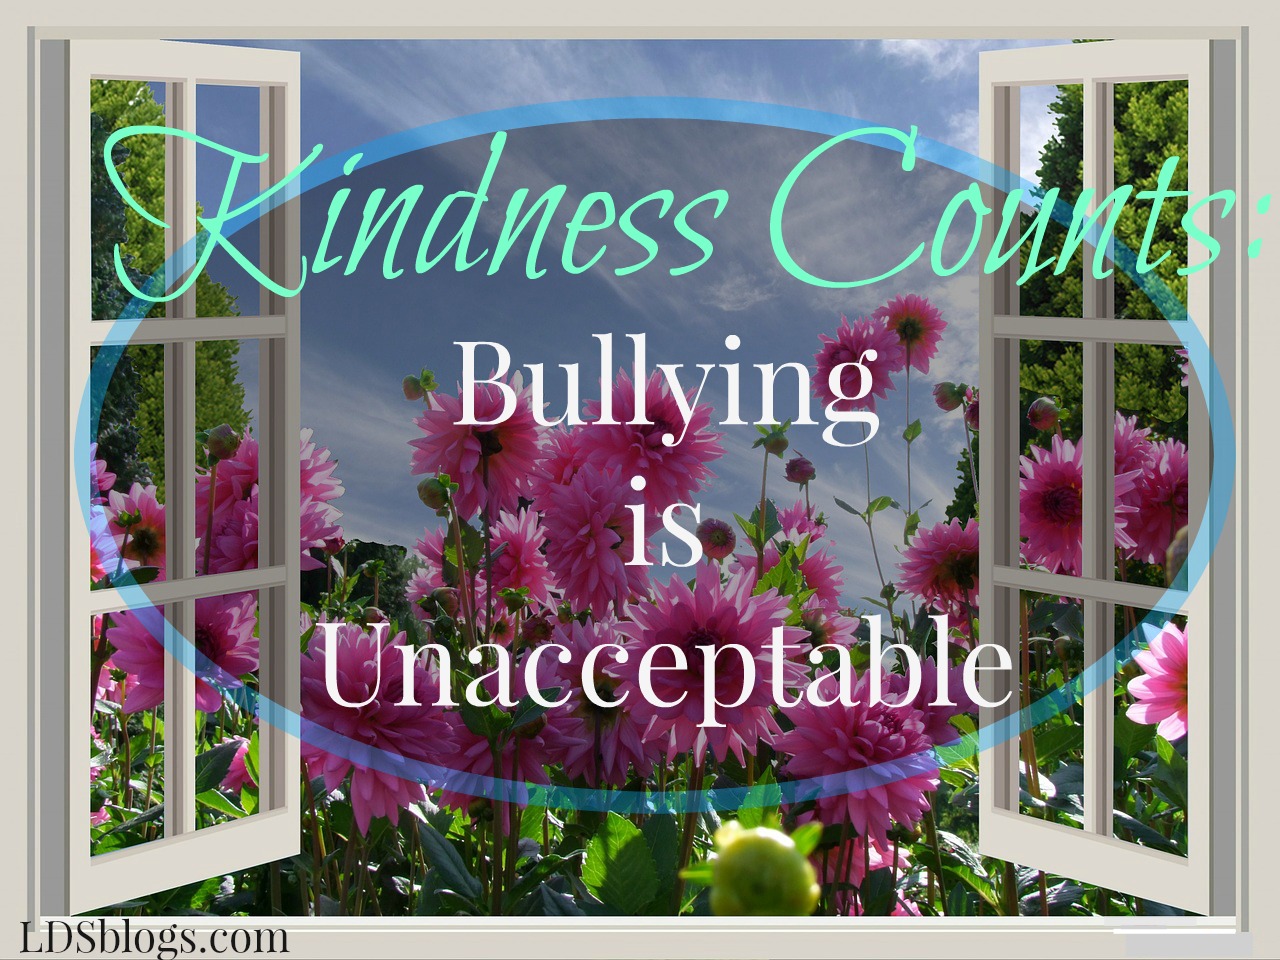 Kindness Counts: Bullying is Unacceptable